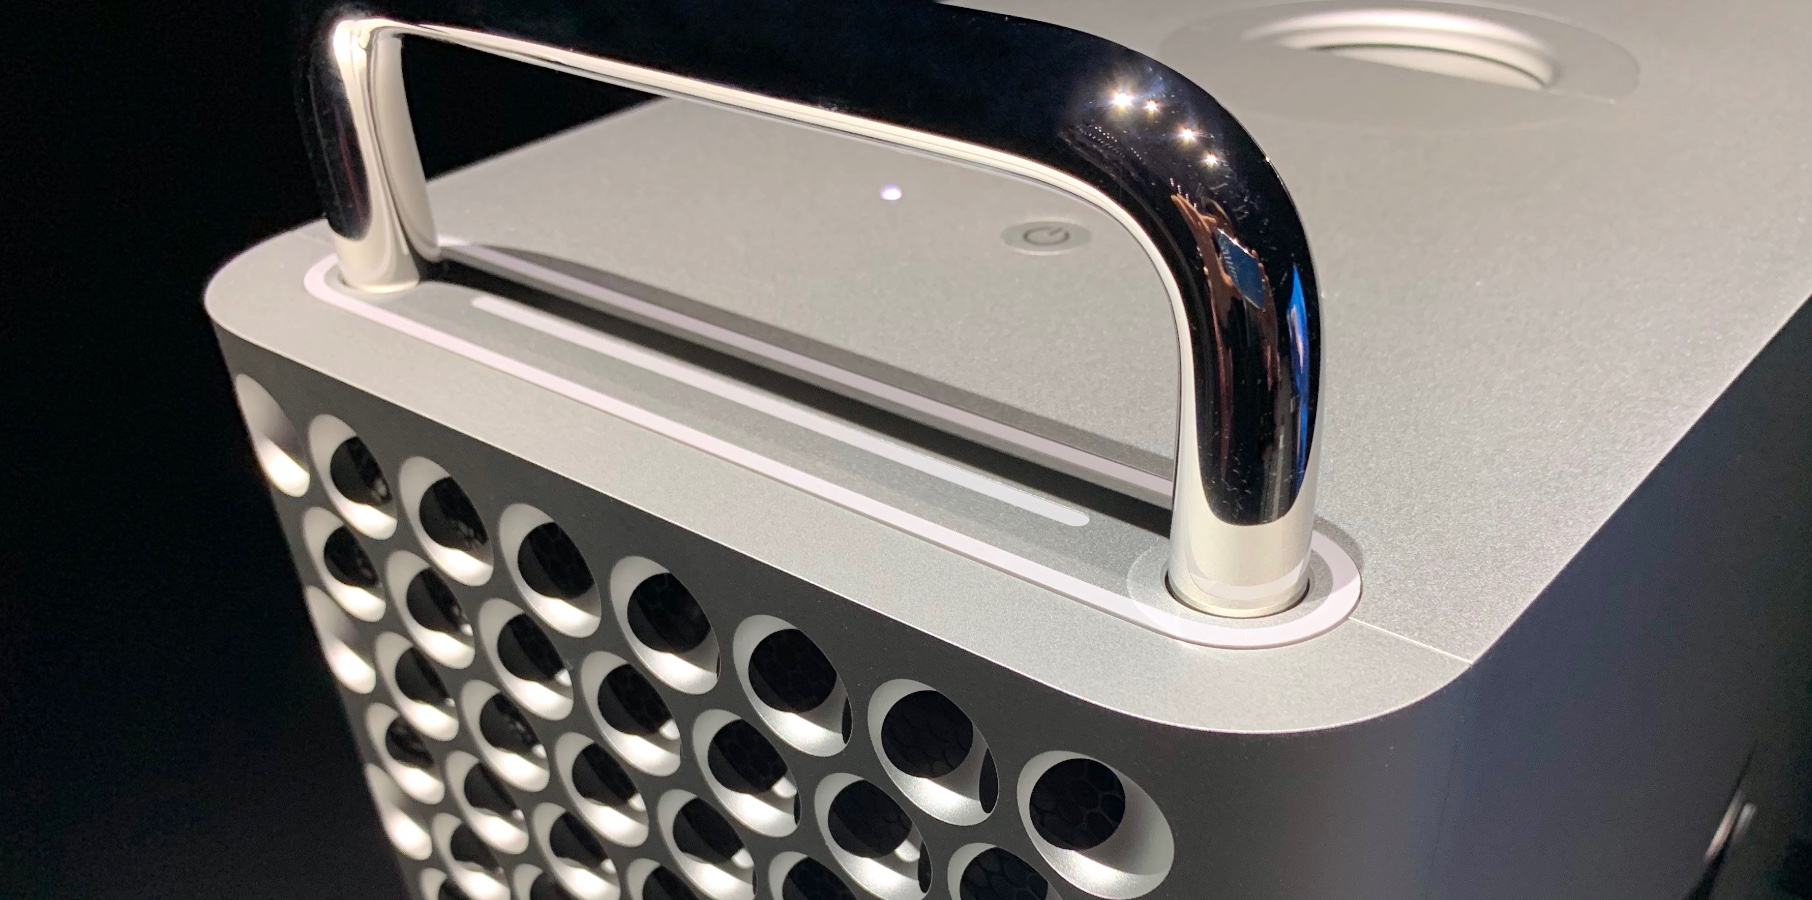 M2 Ultra Mac Pro review shows Apple’s powerhouse hasn’t left the worst of the Intel era